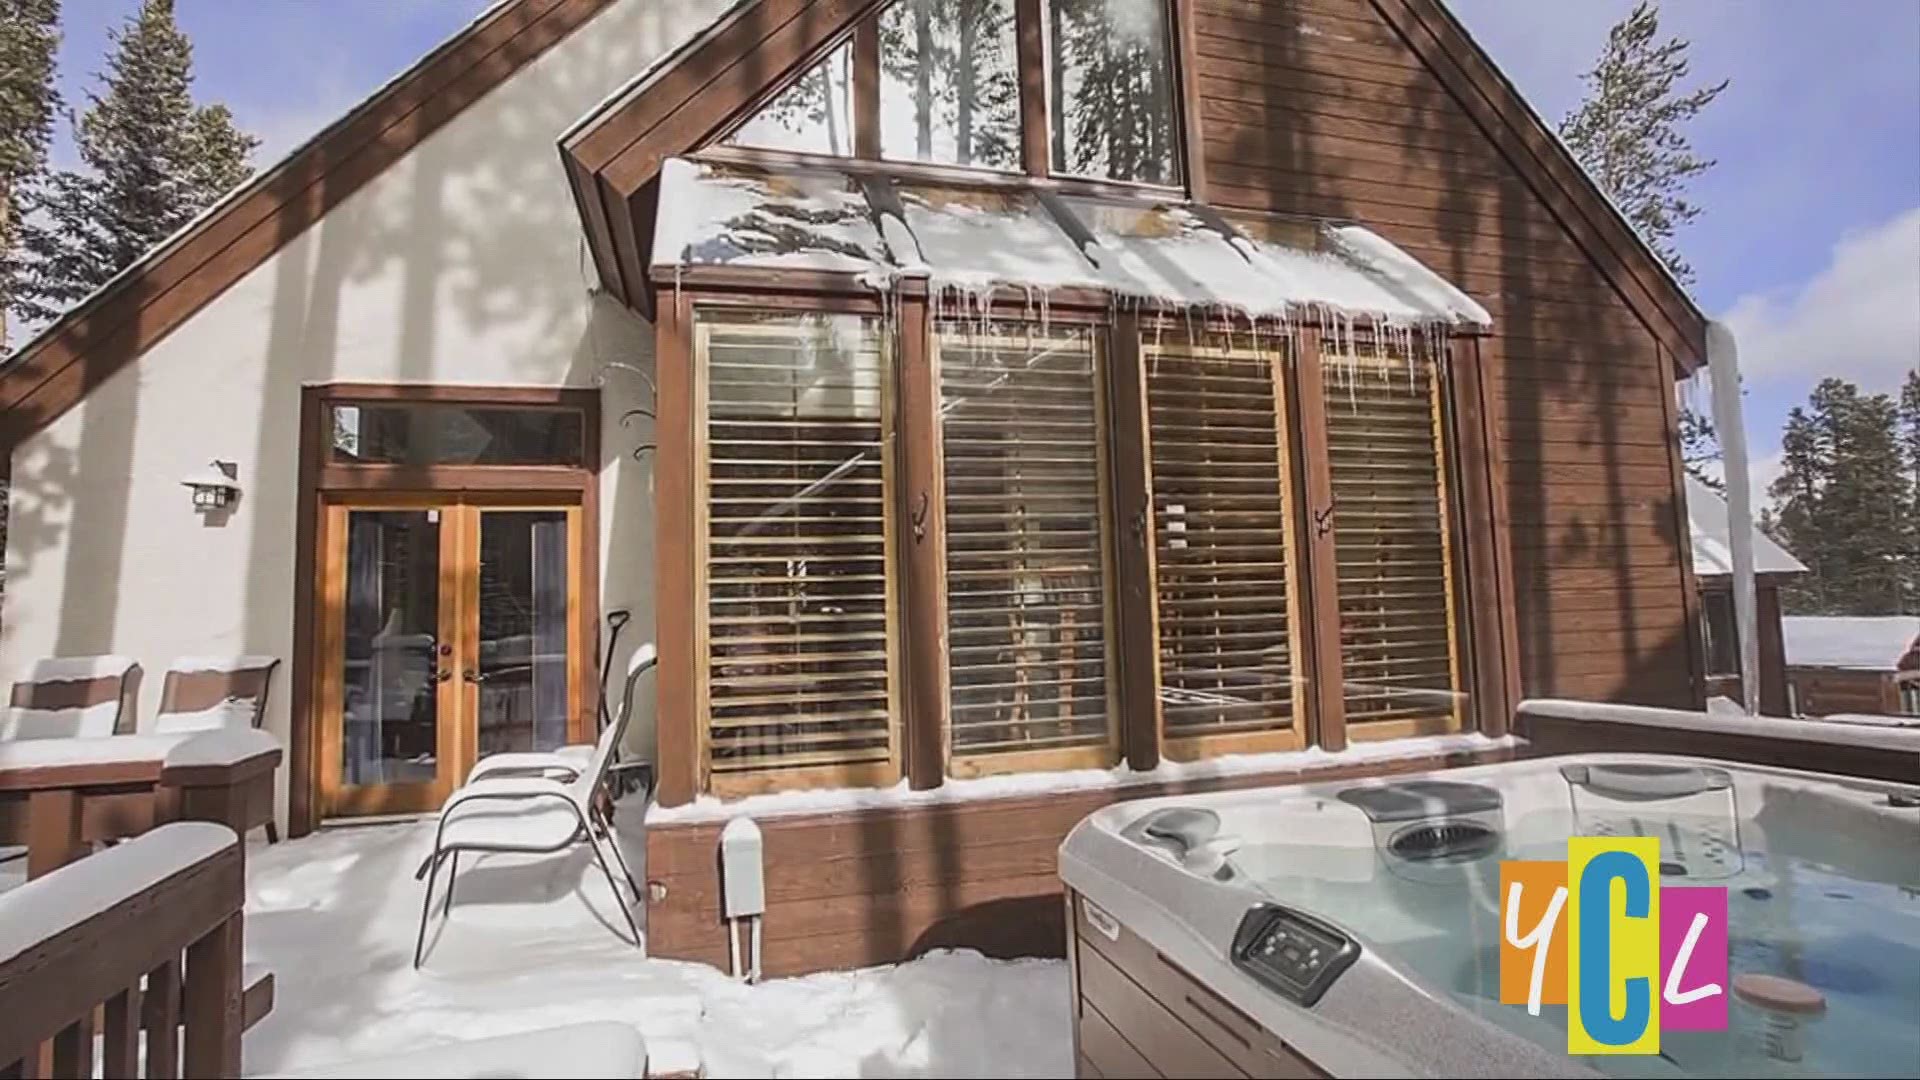 Find splurges and steals still available in Vrbo’s most popular places to travel in the winter sun. The following is a paid segment sponsored VRBO.